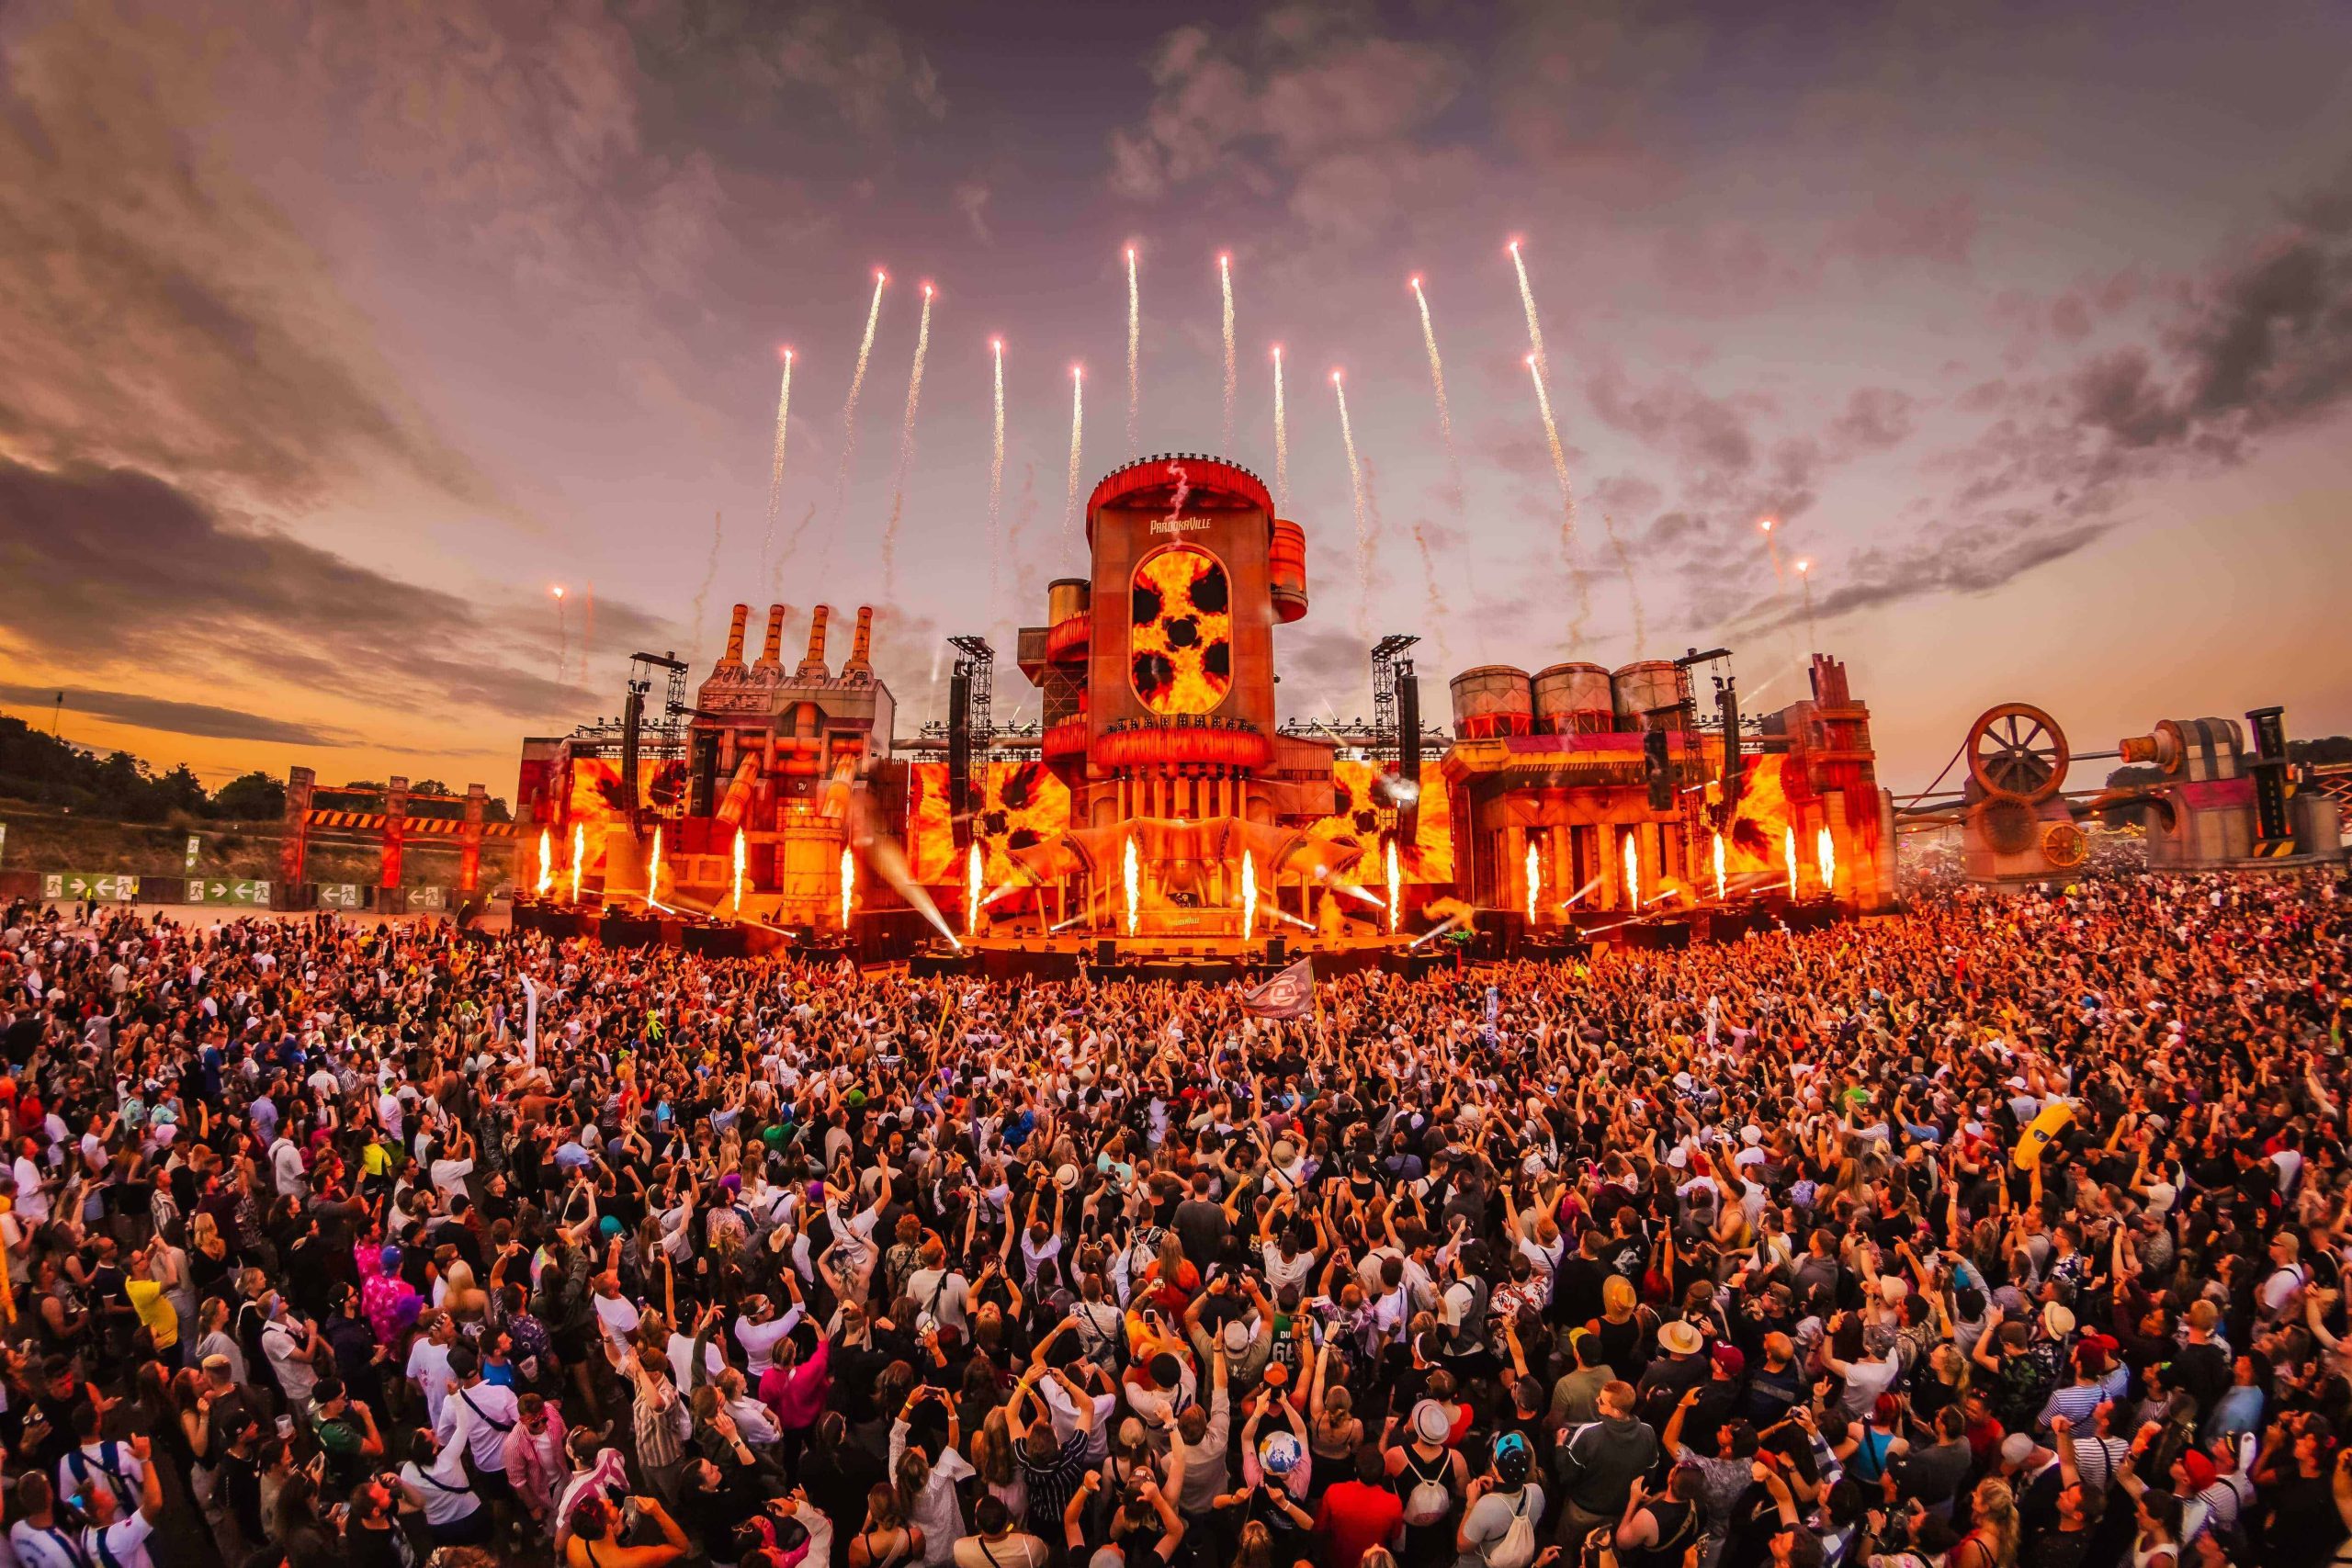 PAROOKAVILLE impresses with massive 7th edition in the City of Dreams [Review]